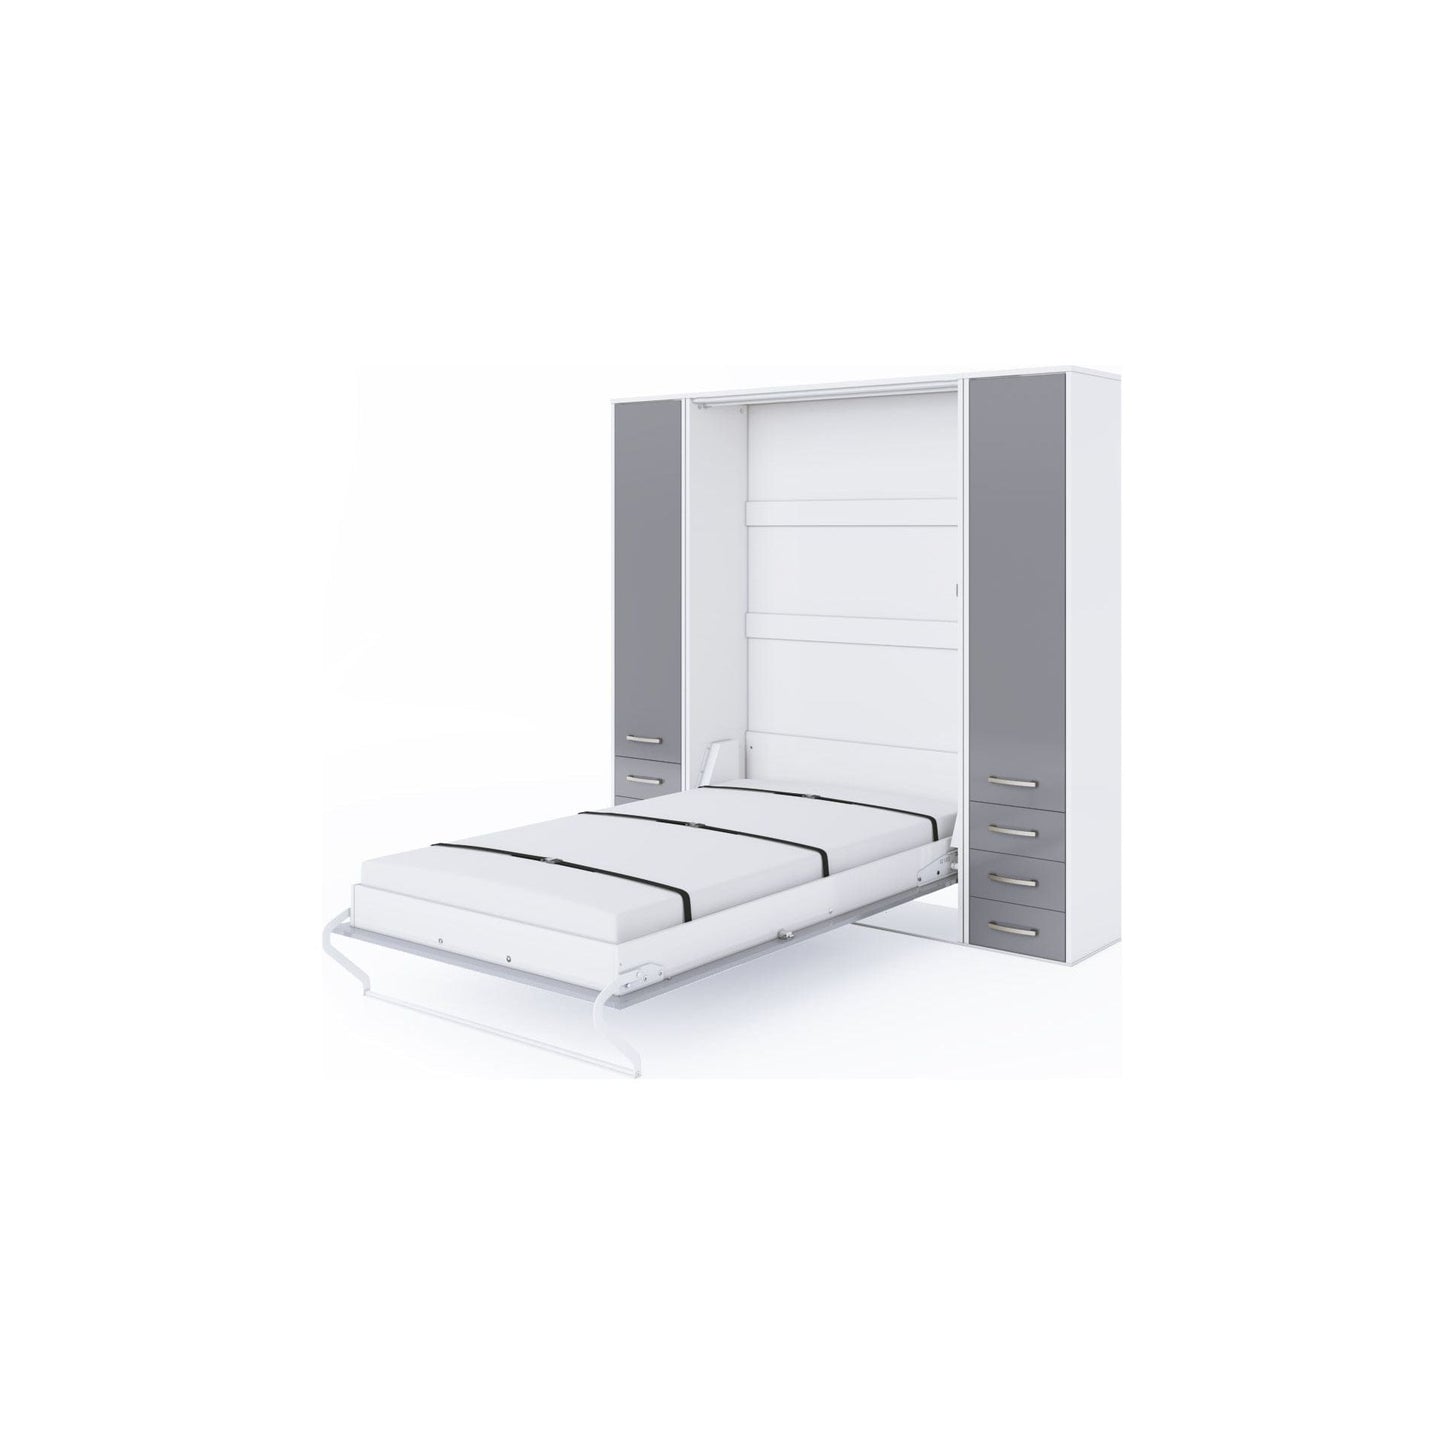 Maxima House Invento Vertical Wall Bed, European Full XL Size with 2 cabinets